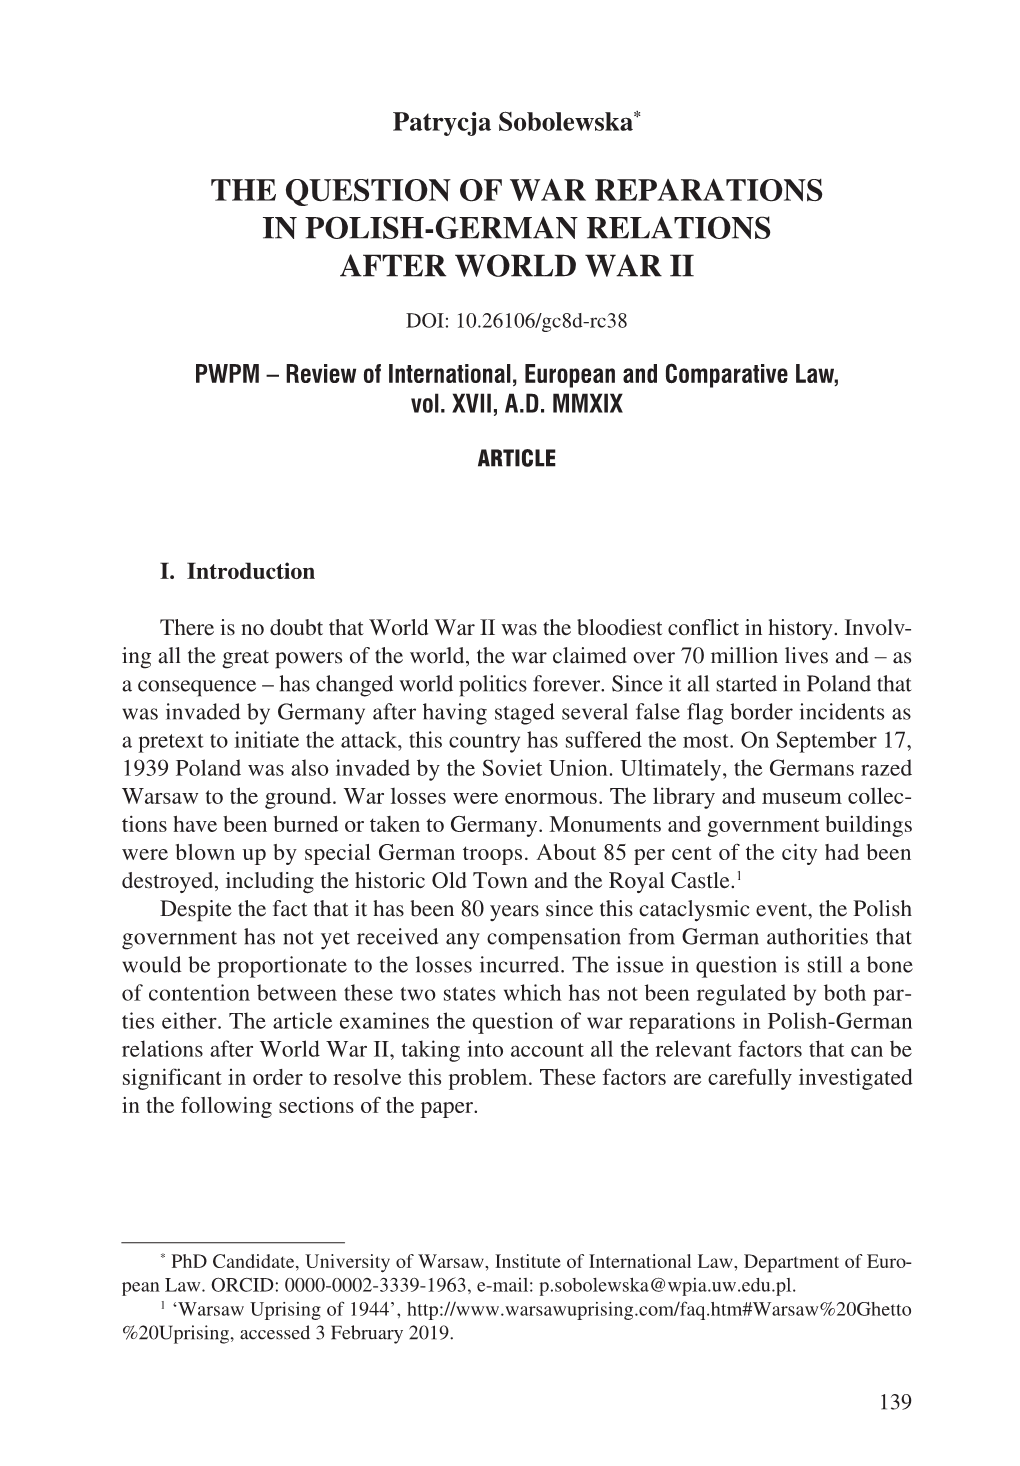 The Question of War Reparations in Polish-German Relations After World War Ii